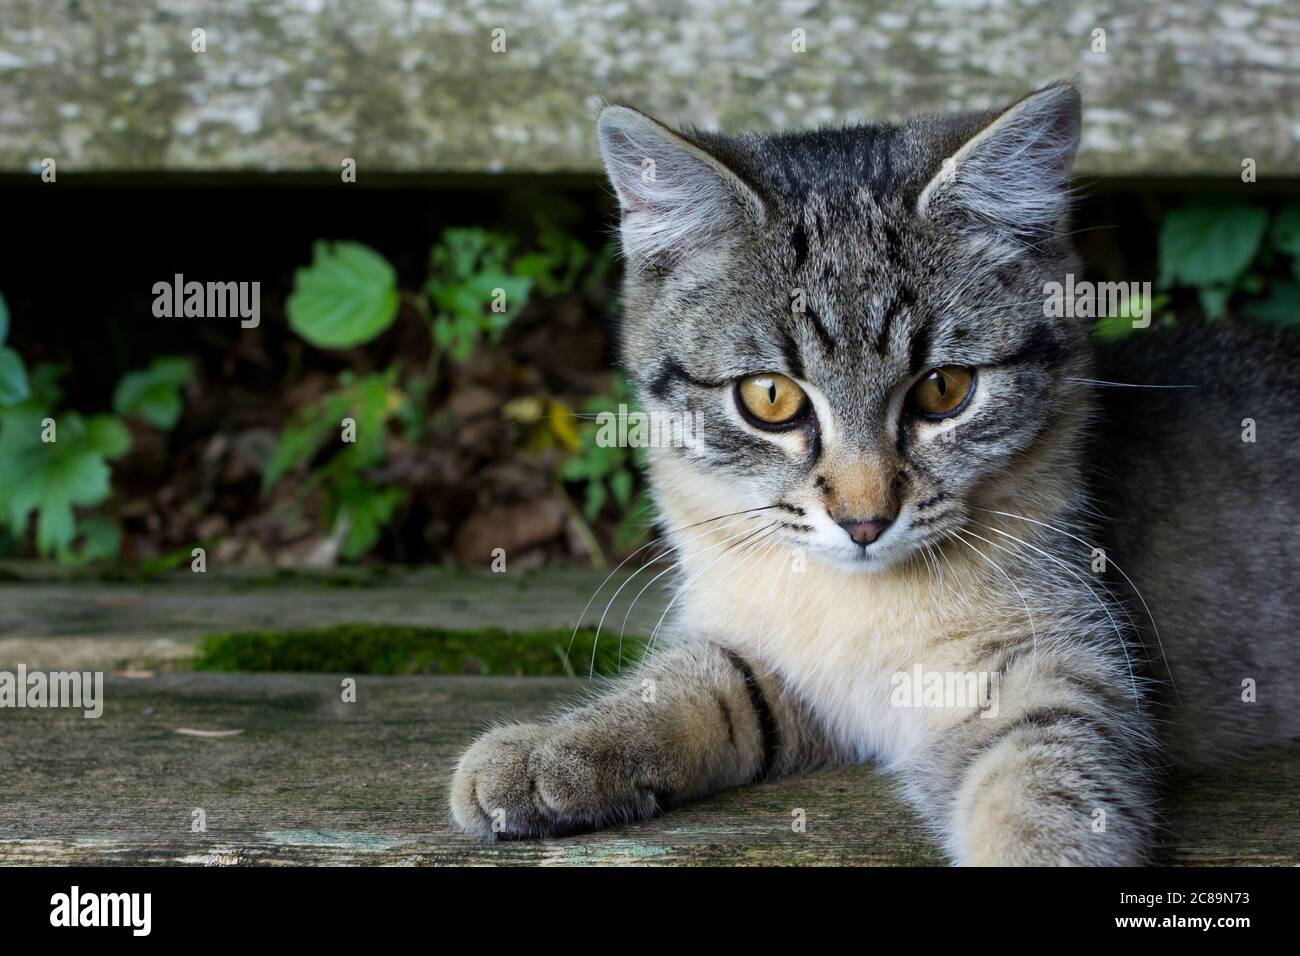 Adorable curious kitten sitting on a wooden bench outdoors Stock Photo